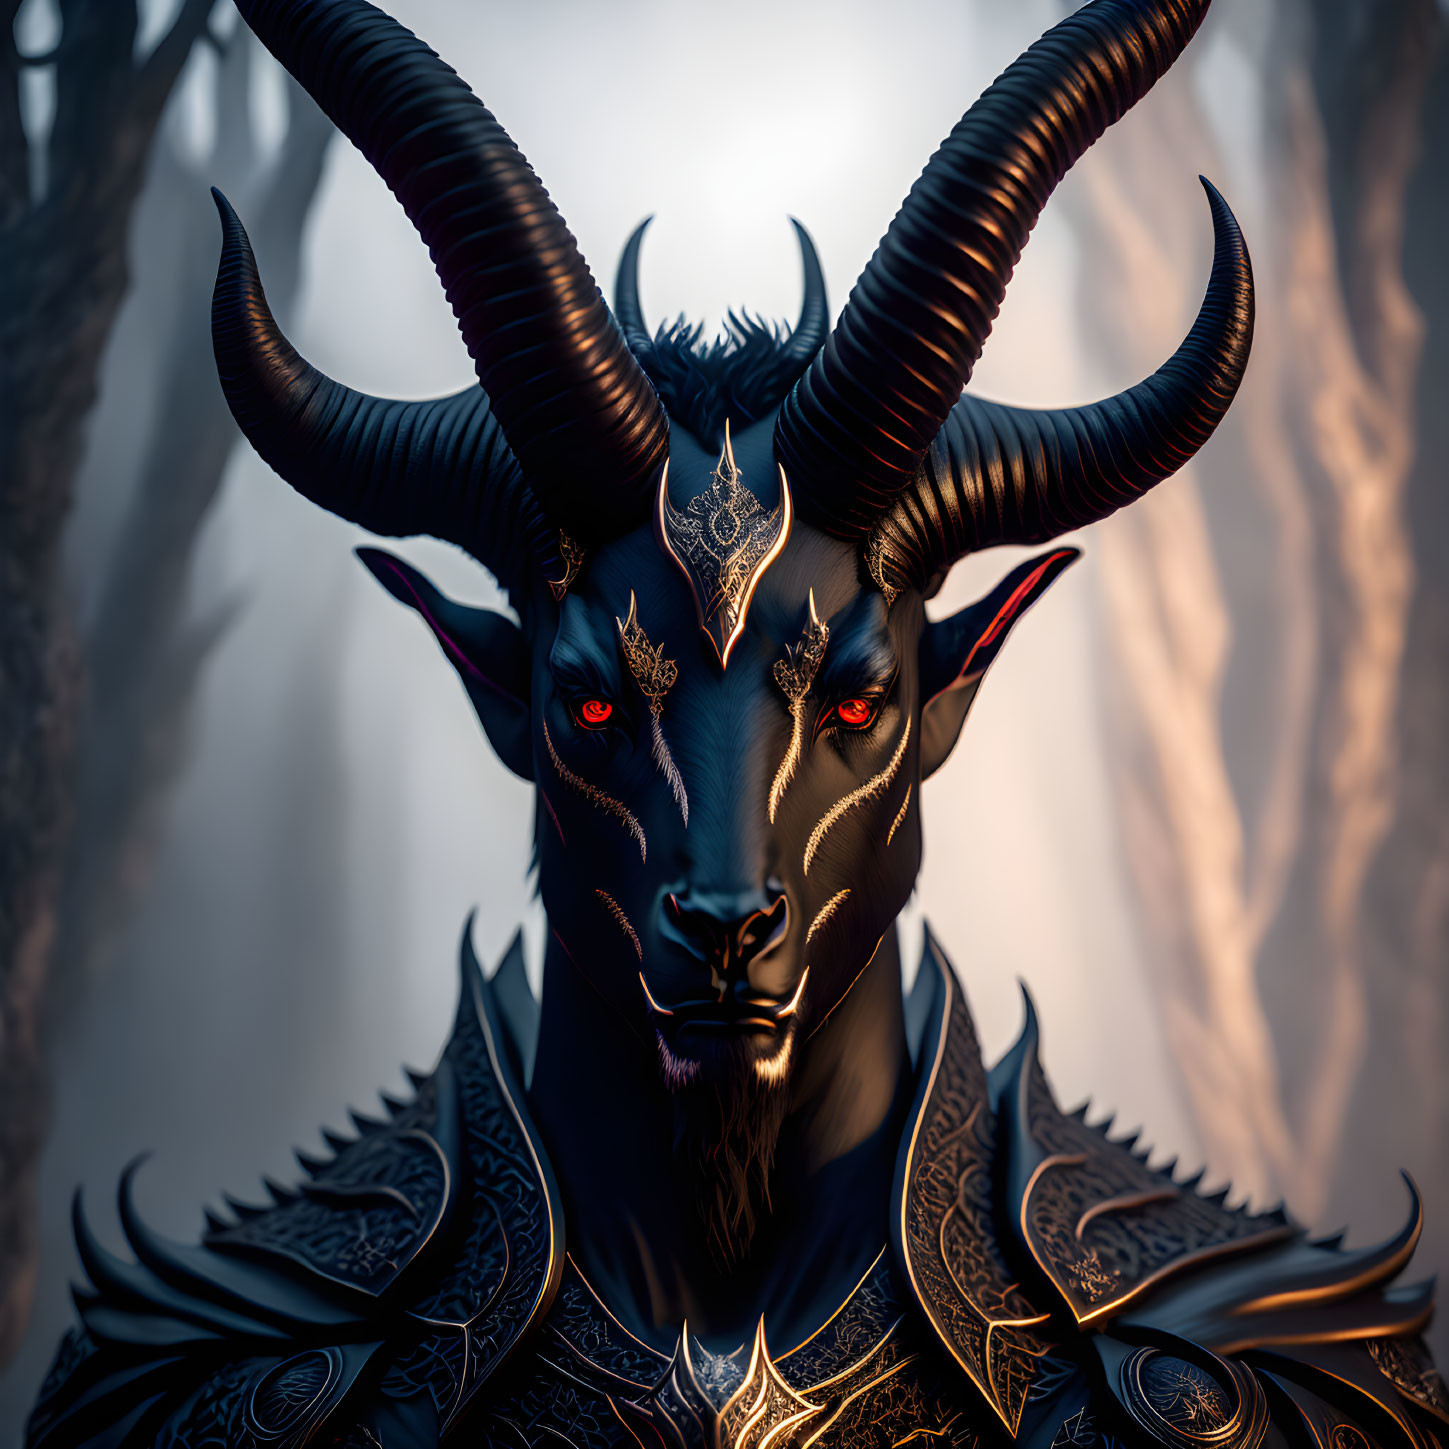 Dark creature with black fur, curved horns, and glowing eyes in intricate armor